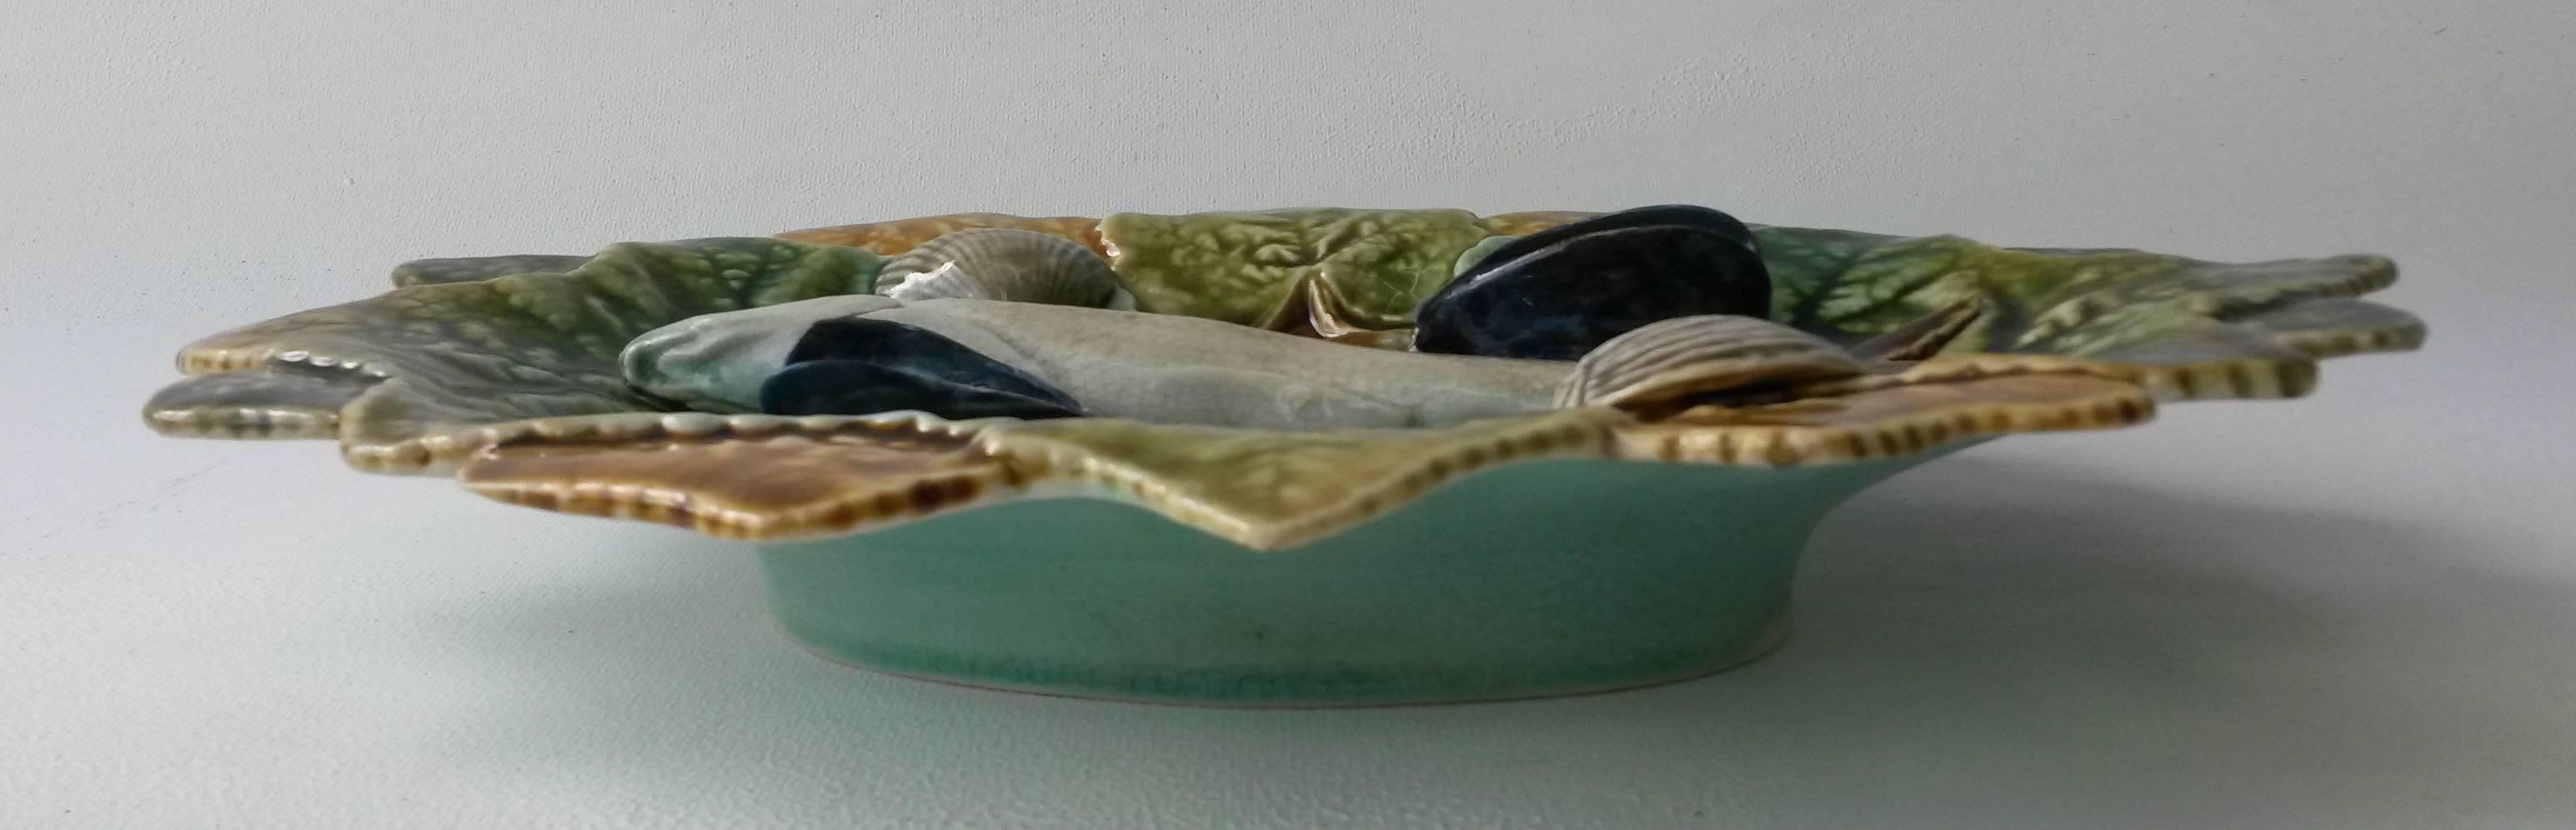 Colorful Palissy wall platter decorated with a fish lying on green and yellow leaves signed Hippolyte Boulenger & co Choisy le Roi, circa 1880.
The platter is decorated with mussels and shells.
  